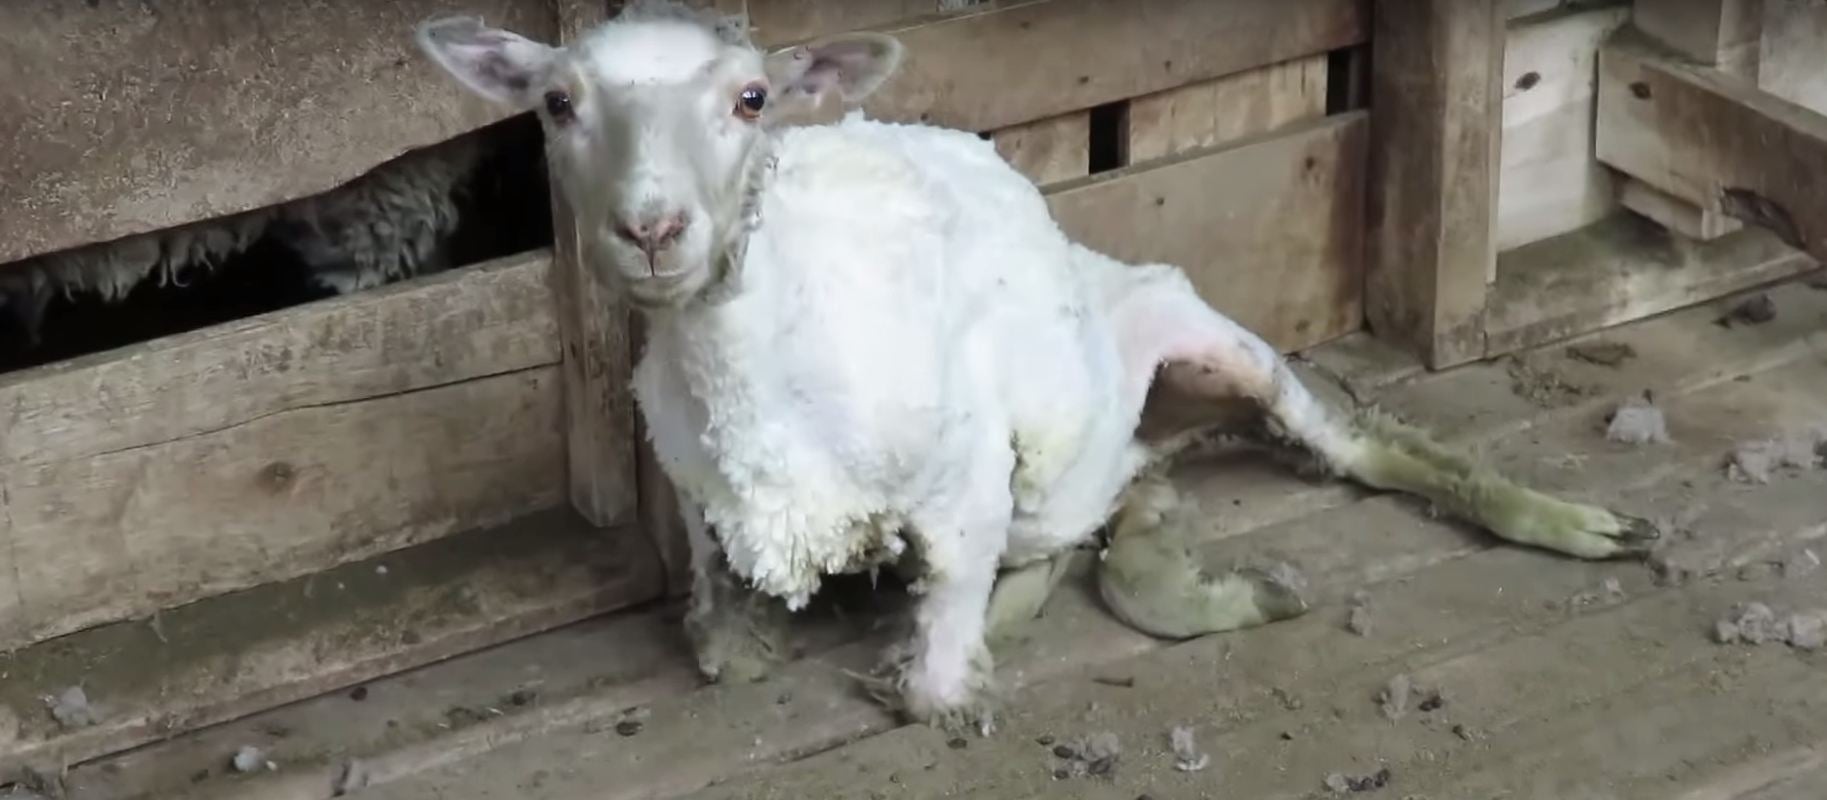 One of the sheep seen in the video